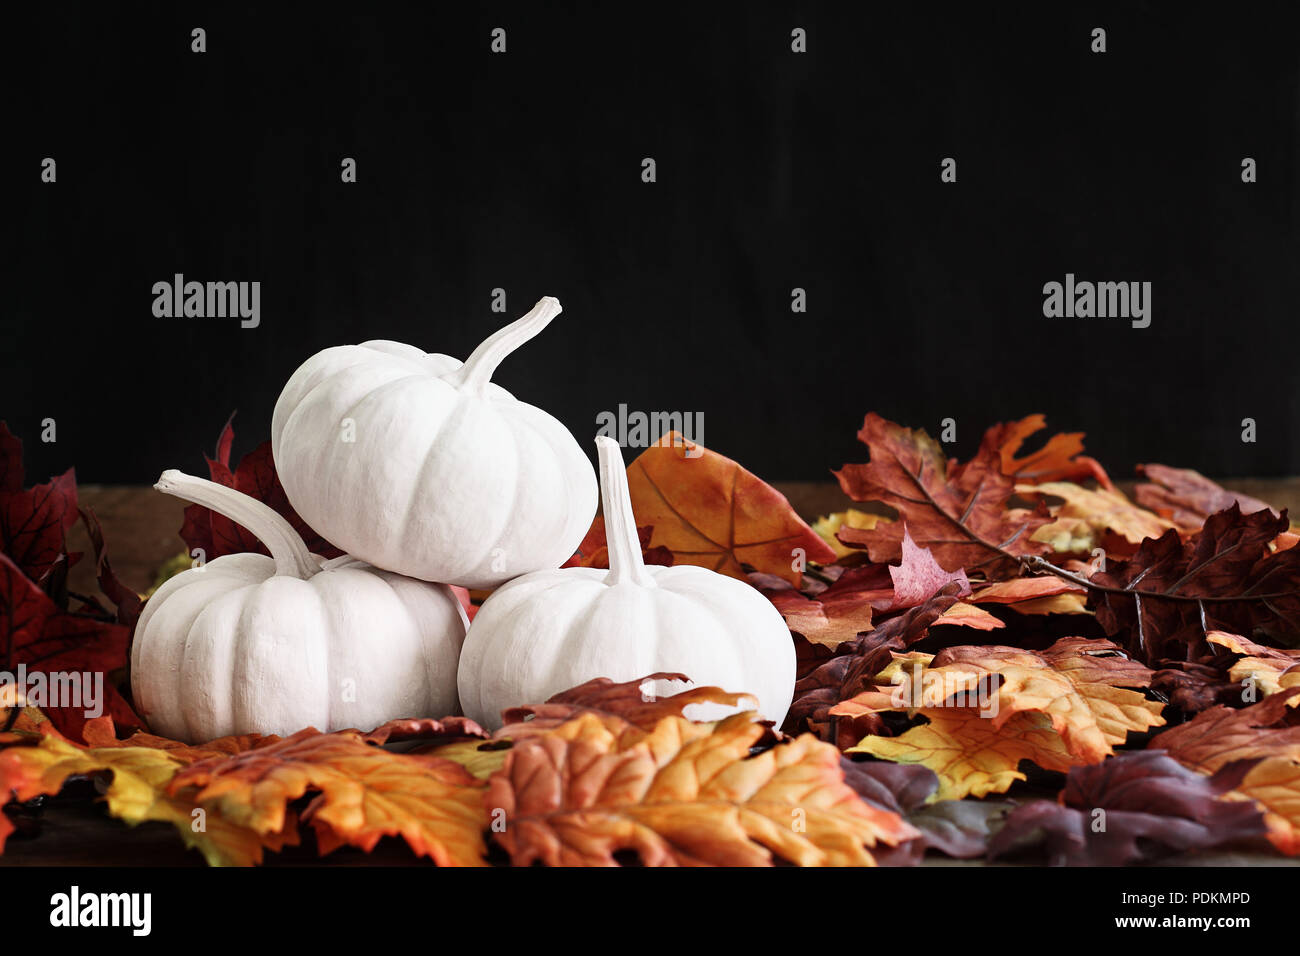 Fall leaves scattered around a stack of three white pumpkins. Extreme shallow depth of field with selective focus on pumkins. Free space for text. Stock Photo